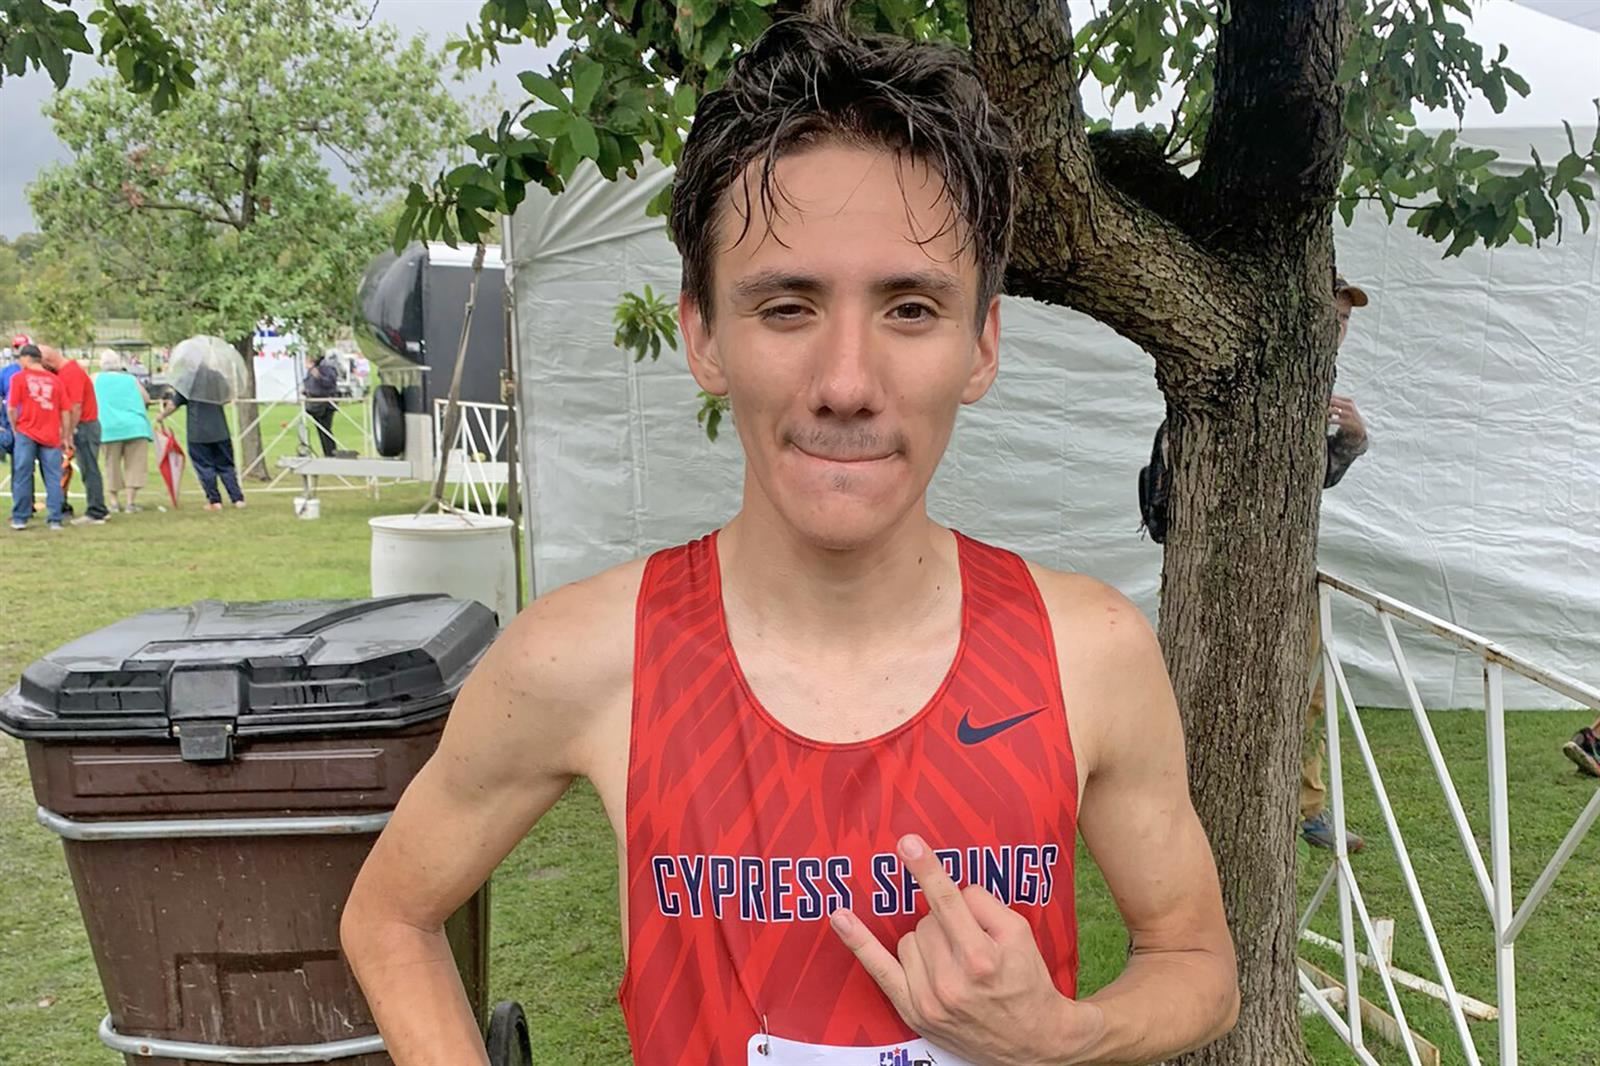 Cypress Springs junior Manny Vela placed 72nd overall with a time of 16:47.20 at the UIL Cross Country State Championships.